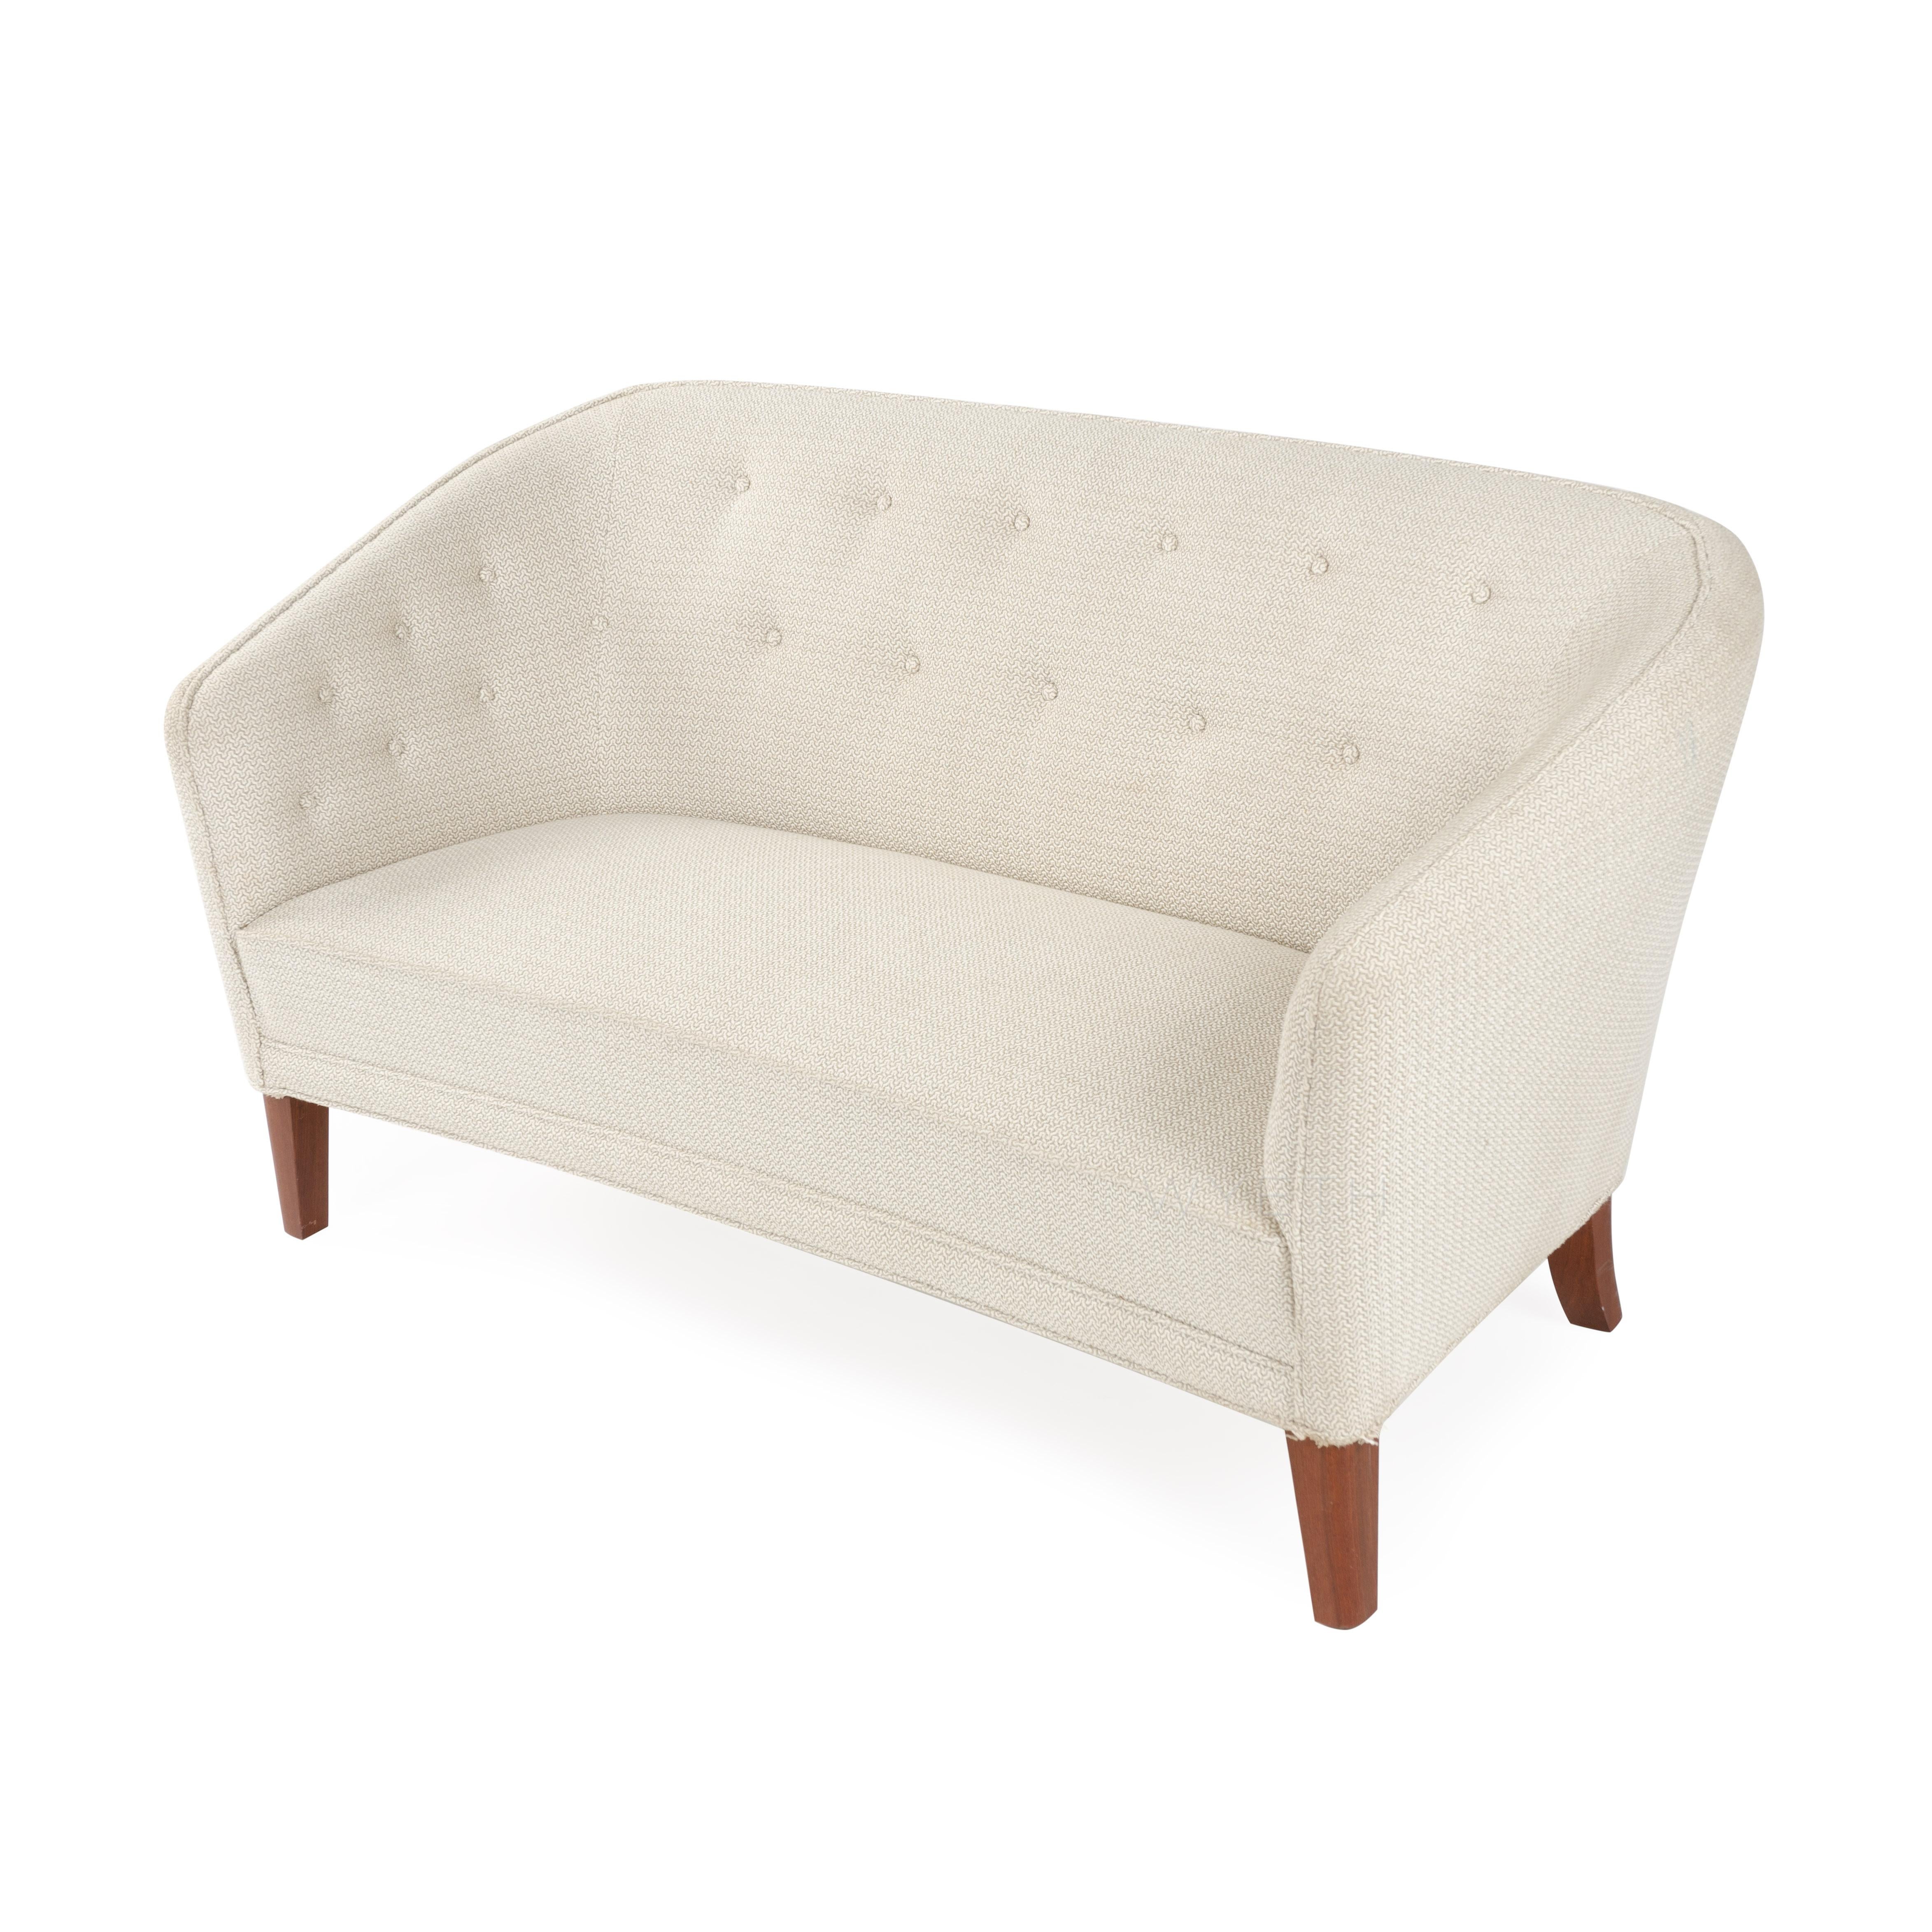 An elegant and superbly crafted high-backed settee having a curving wraparound button-tufted back and tapered dowel-form legs.